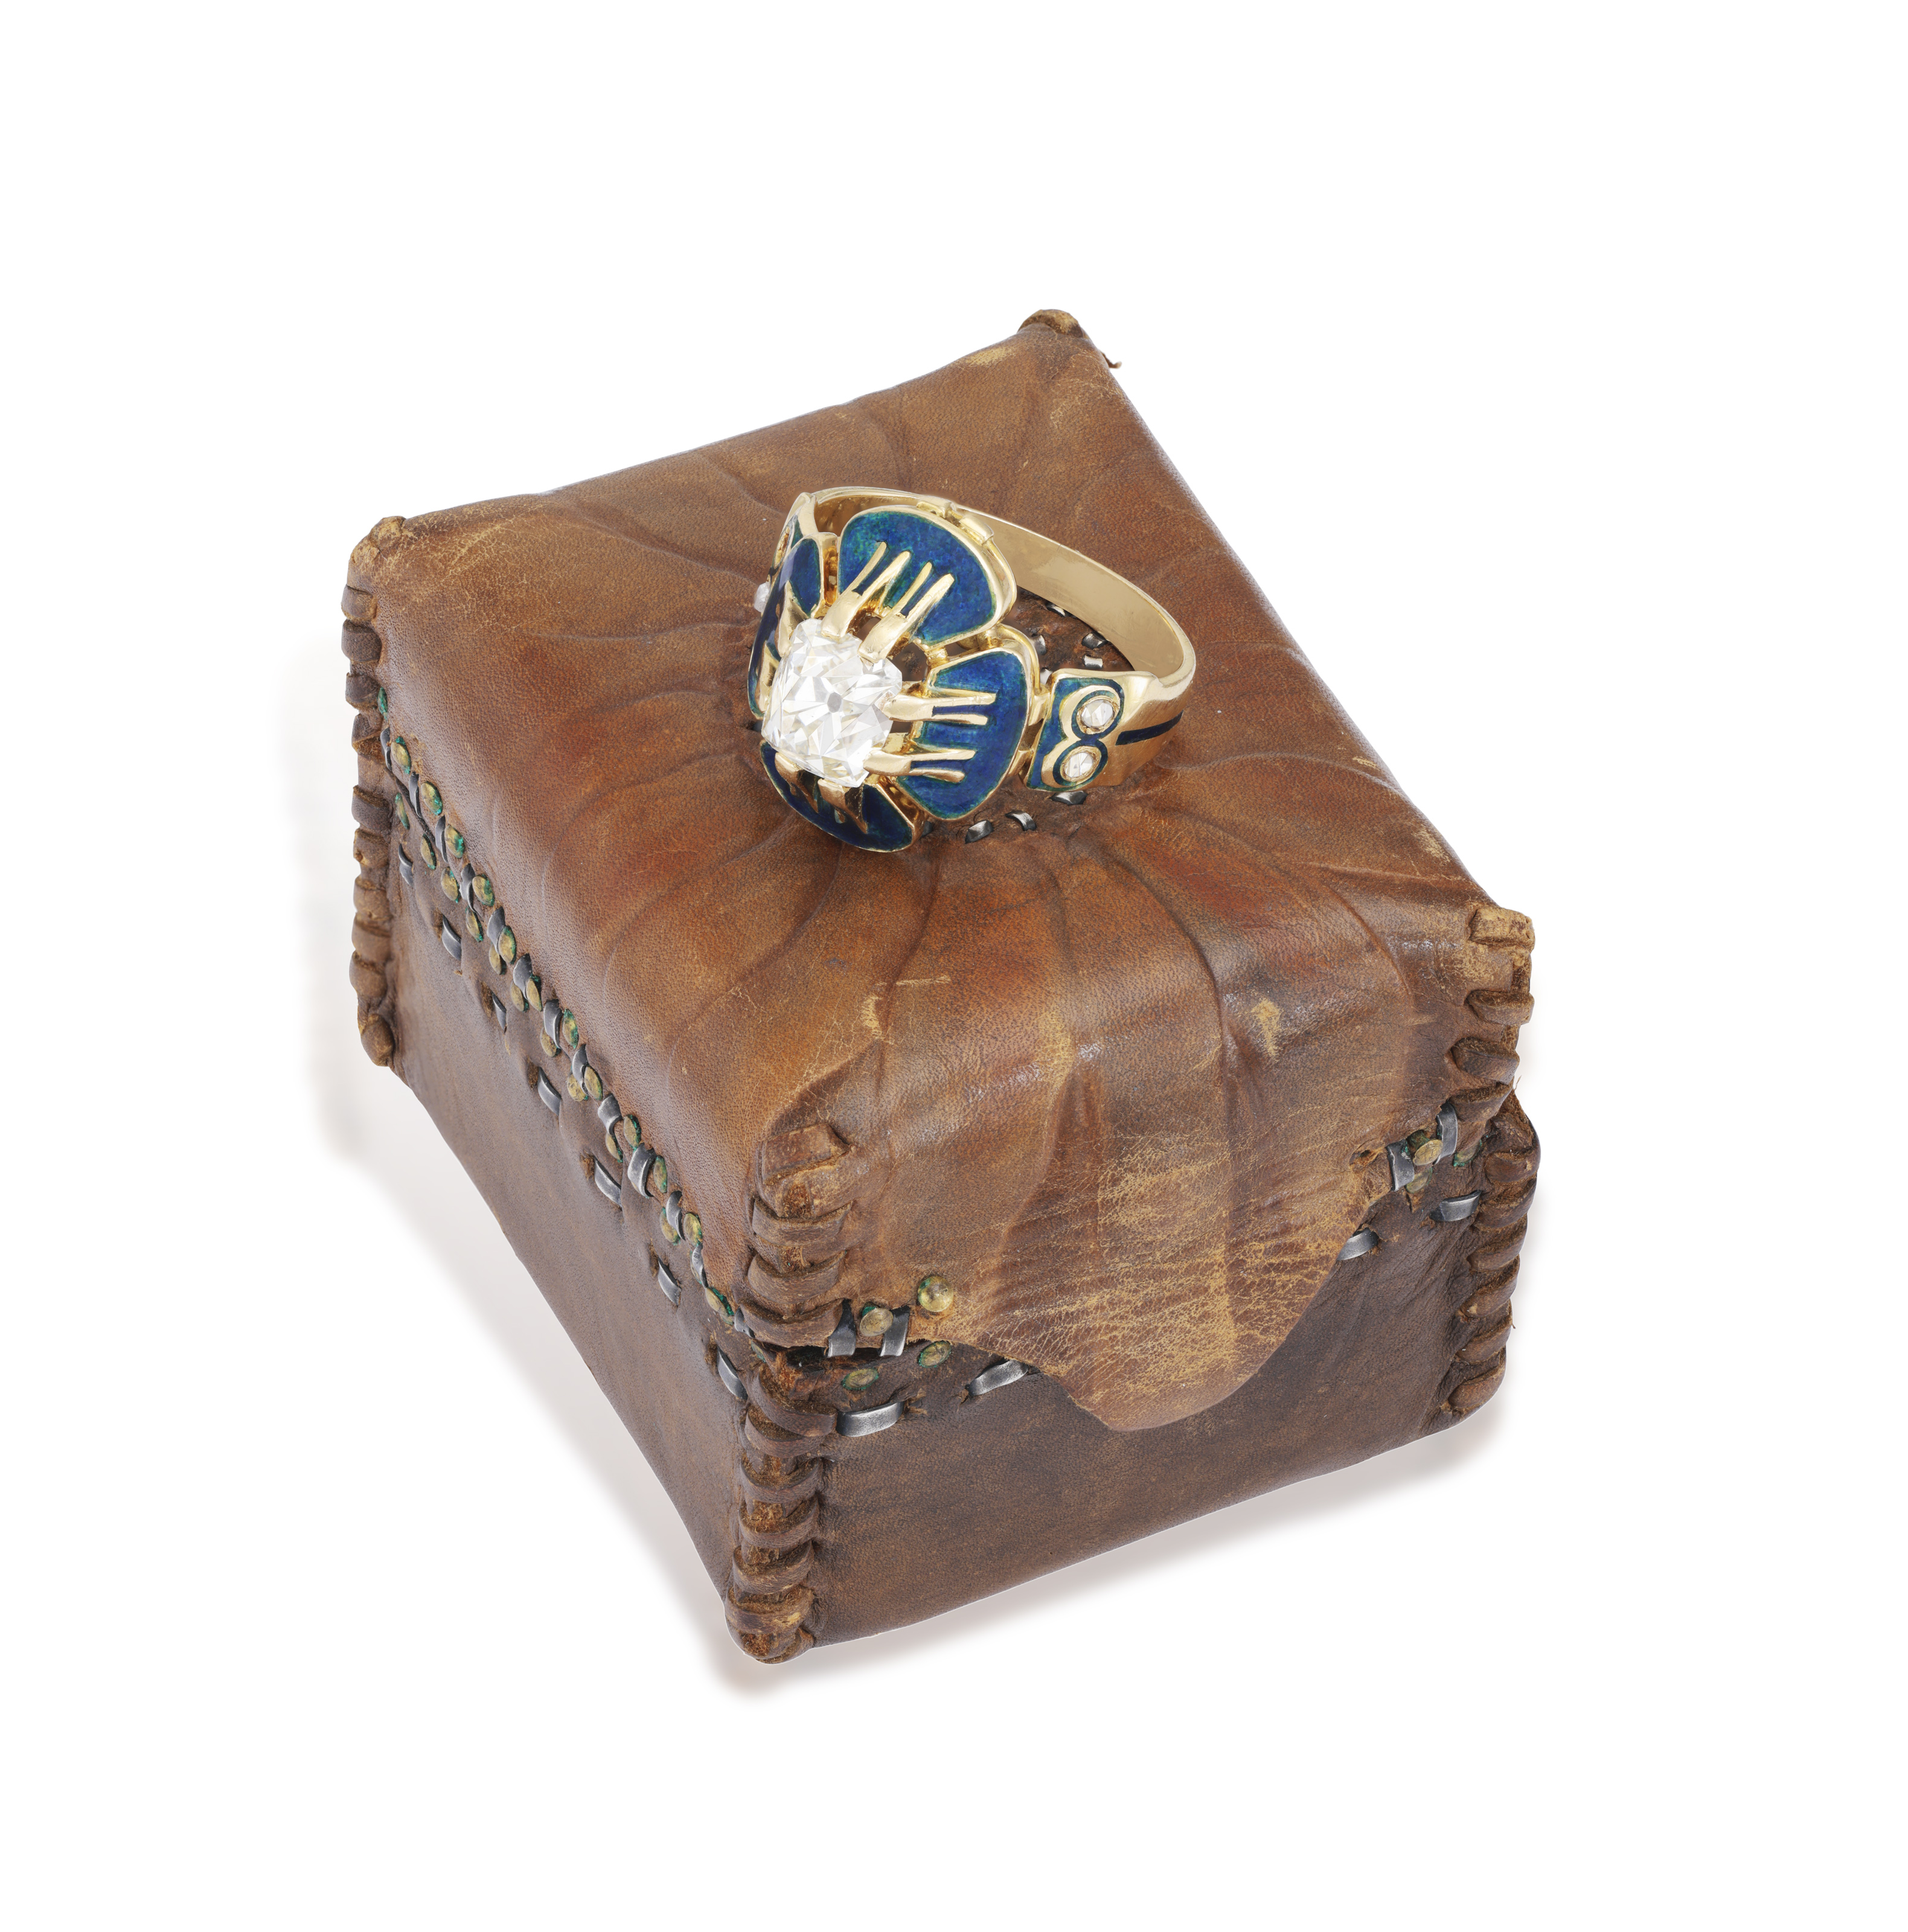 A RARE ART NOUVEAU ENAMEL AND DIAMOND 'PANSY' RING, BY CHARLES RIVAUD, CIRCA 1900 The cushion-shaped - Image 4 of 6